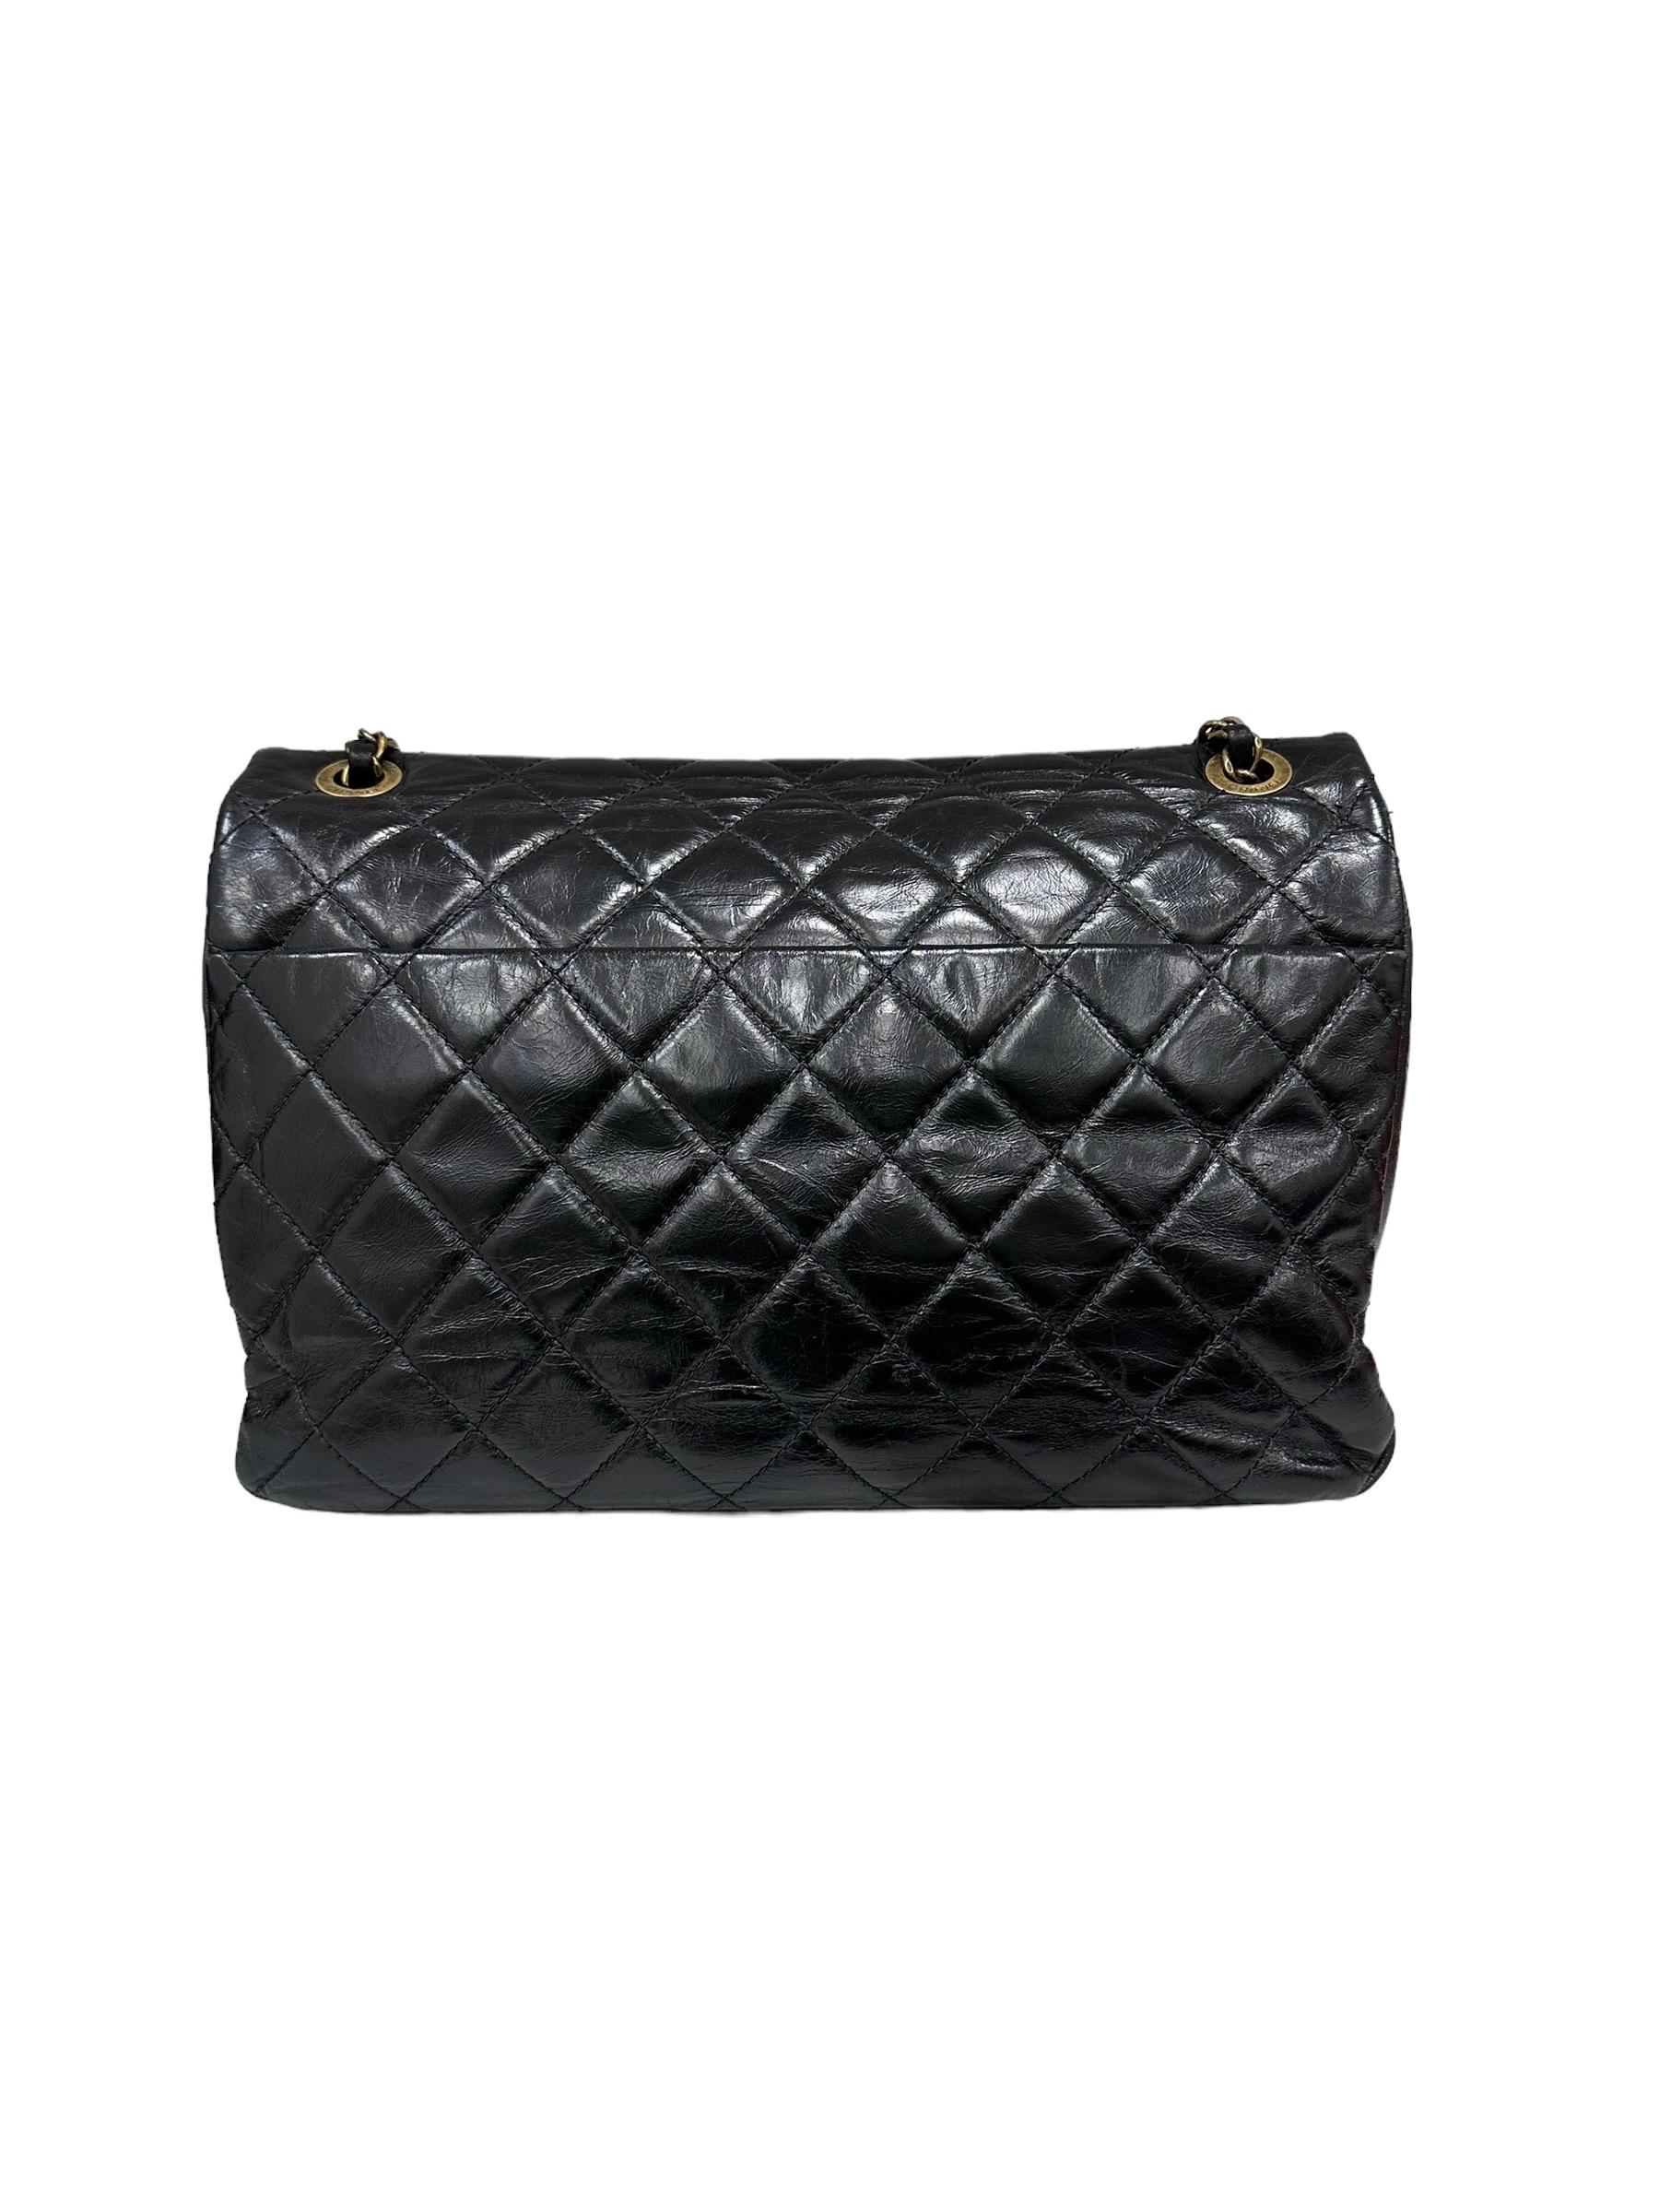 Women's 2016 Chanel Urban Mix  Flap Black Quilted Leather Shoulder Bag For Sale